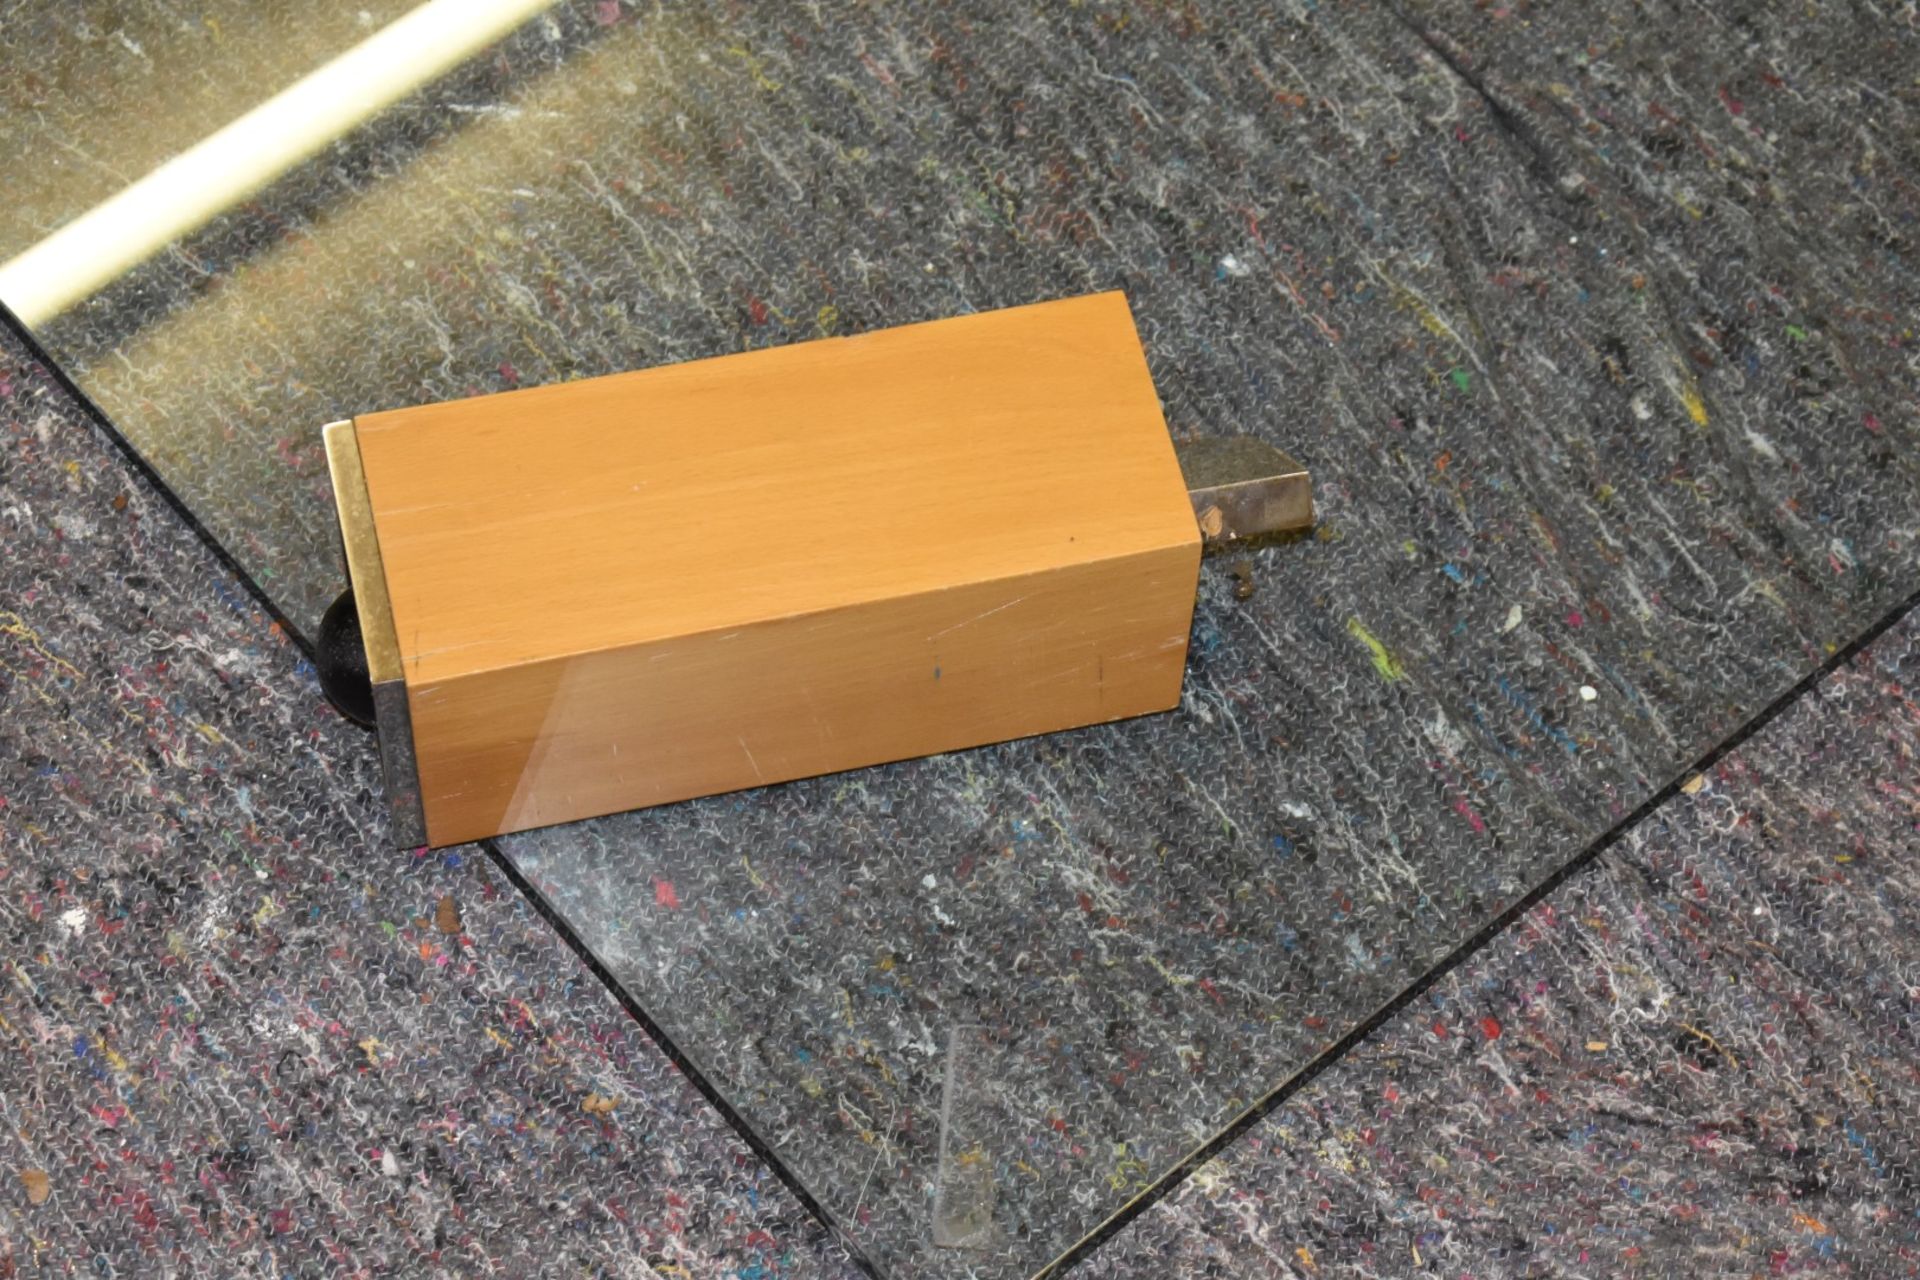 1 x Coffee Table With 2cm Thick Glass Top and Beech Legs With Castors - Dimensions: H33 x W120 x - Image 2 of 4